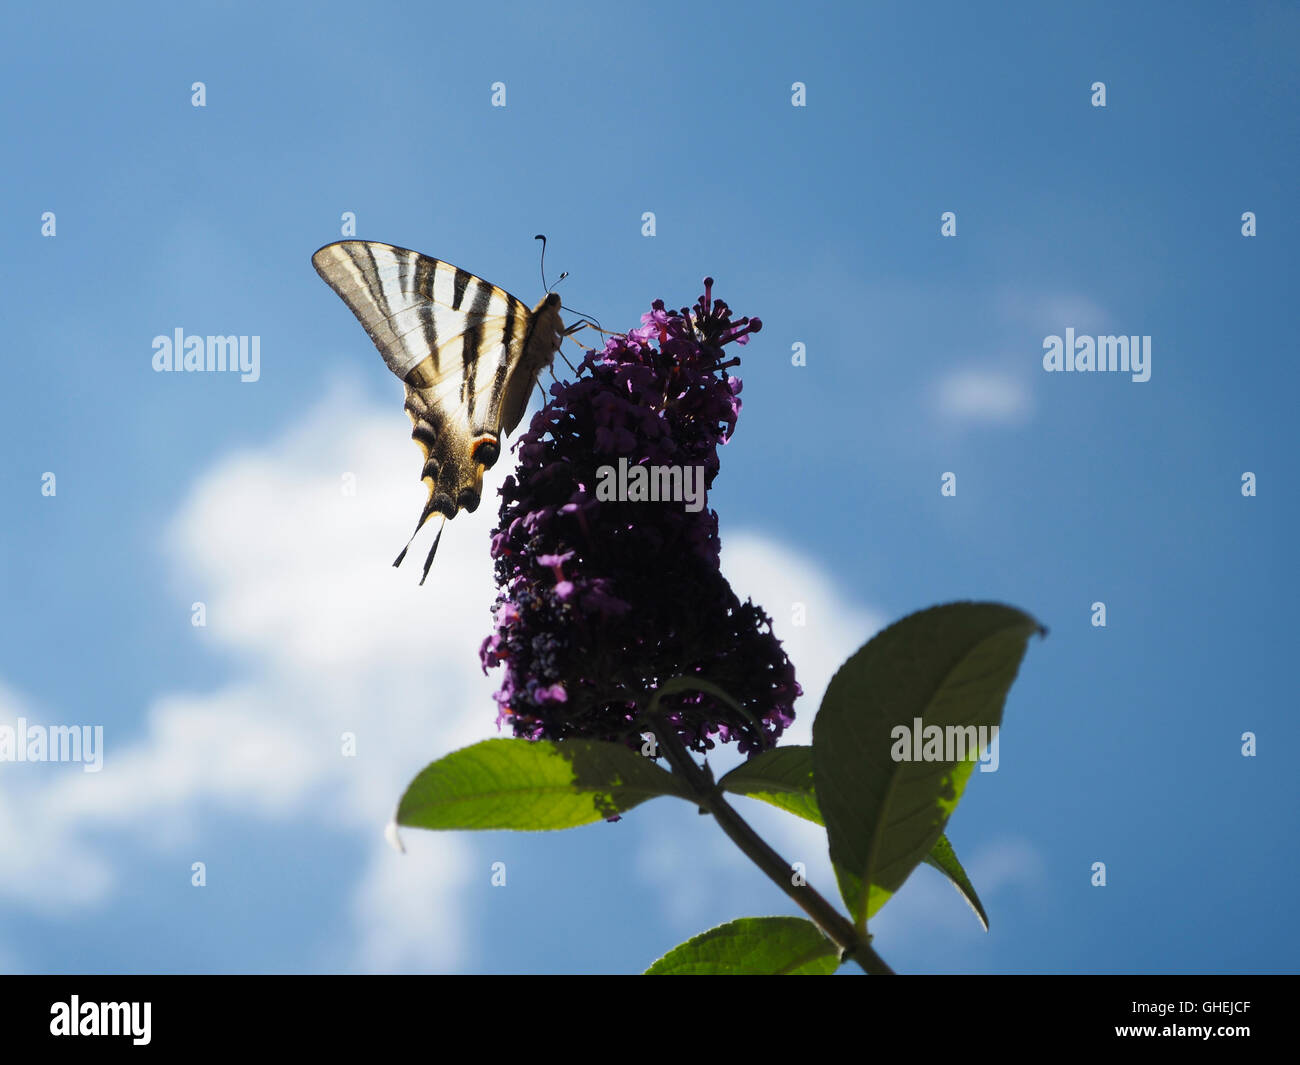 Black and white butterfly sitting on plant backlight with blue sky and cloud, Palairac, Corbieres, France Stock Photo